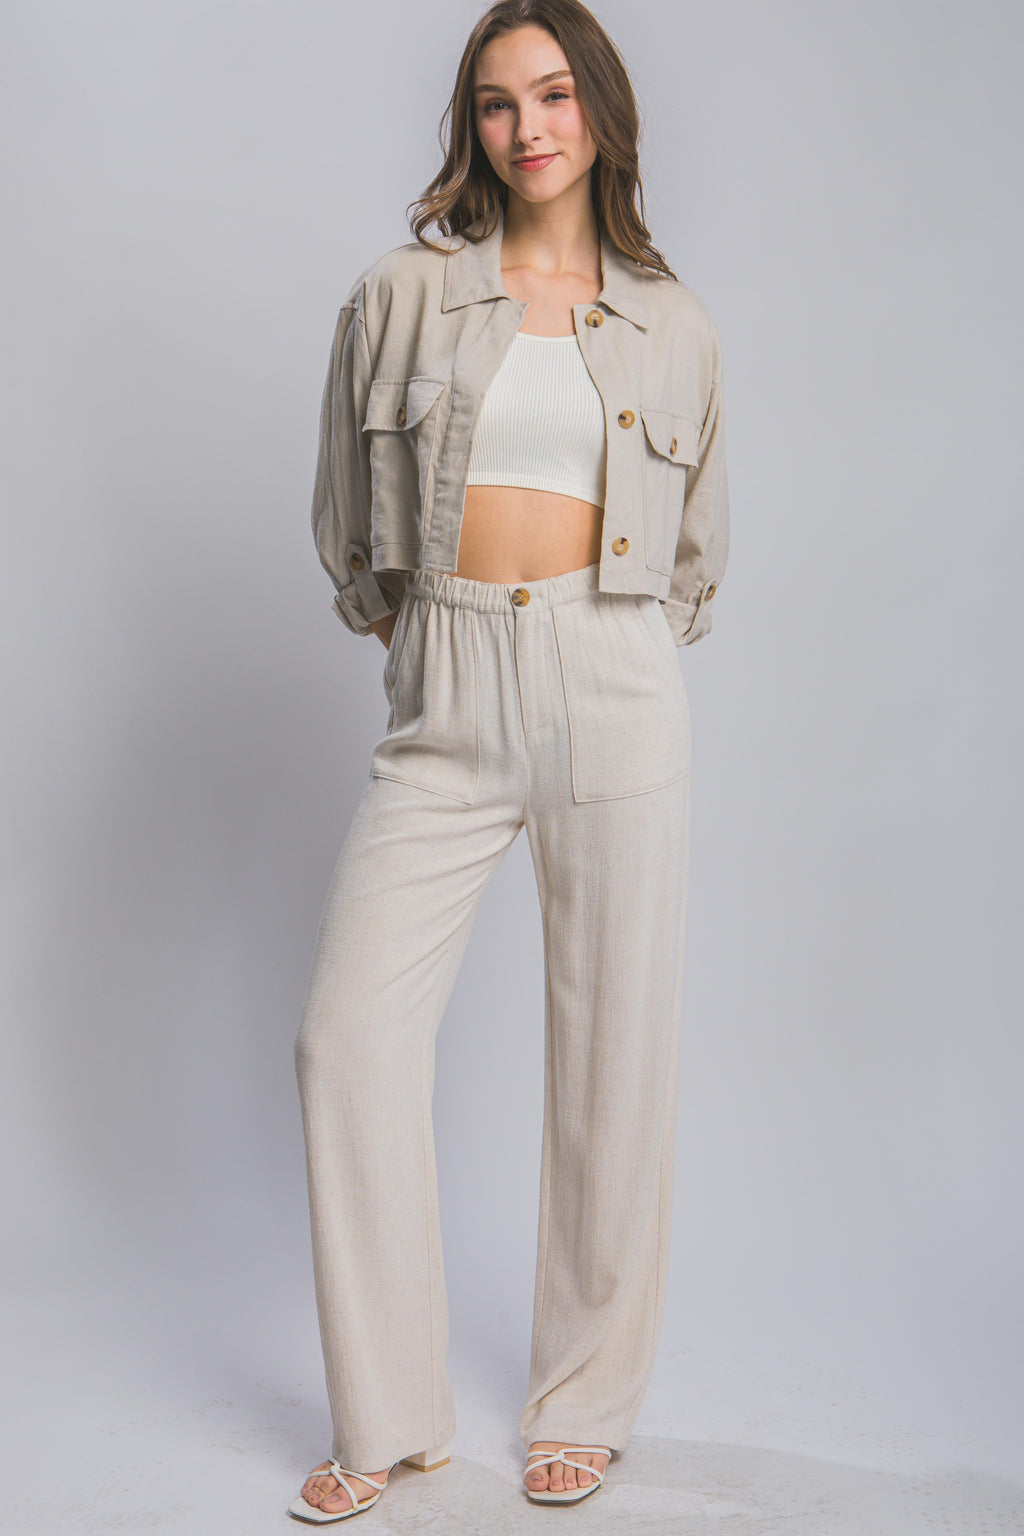 Long Ivory linen pants with dual side pockets and button front closure